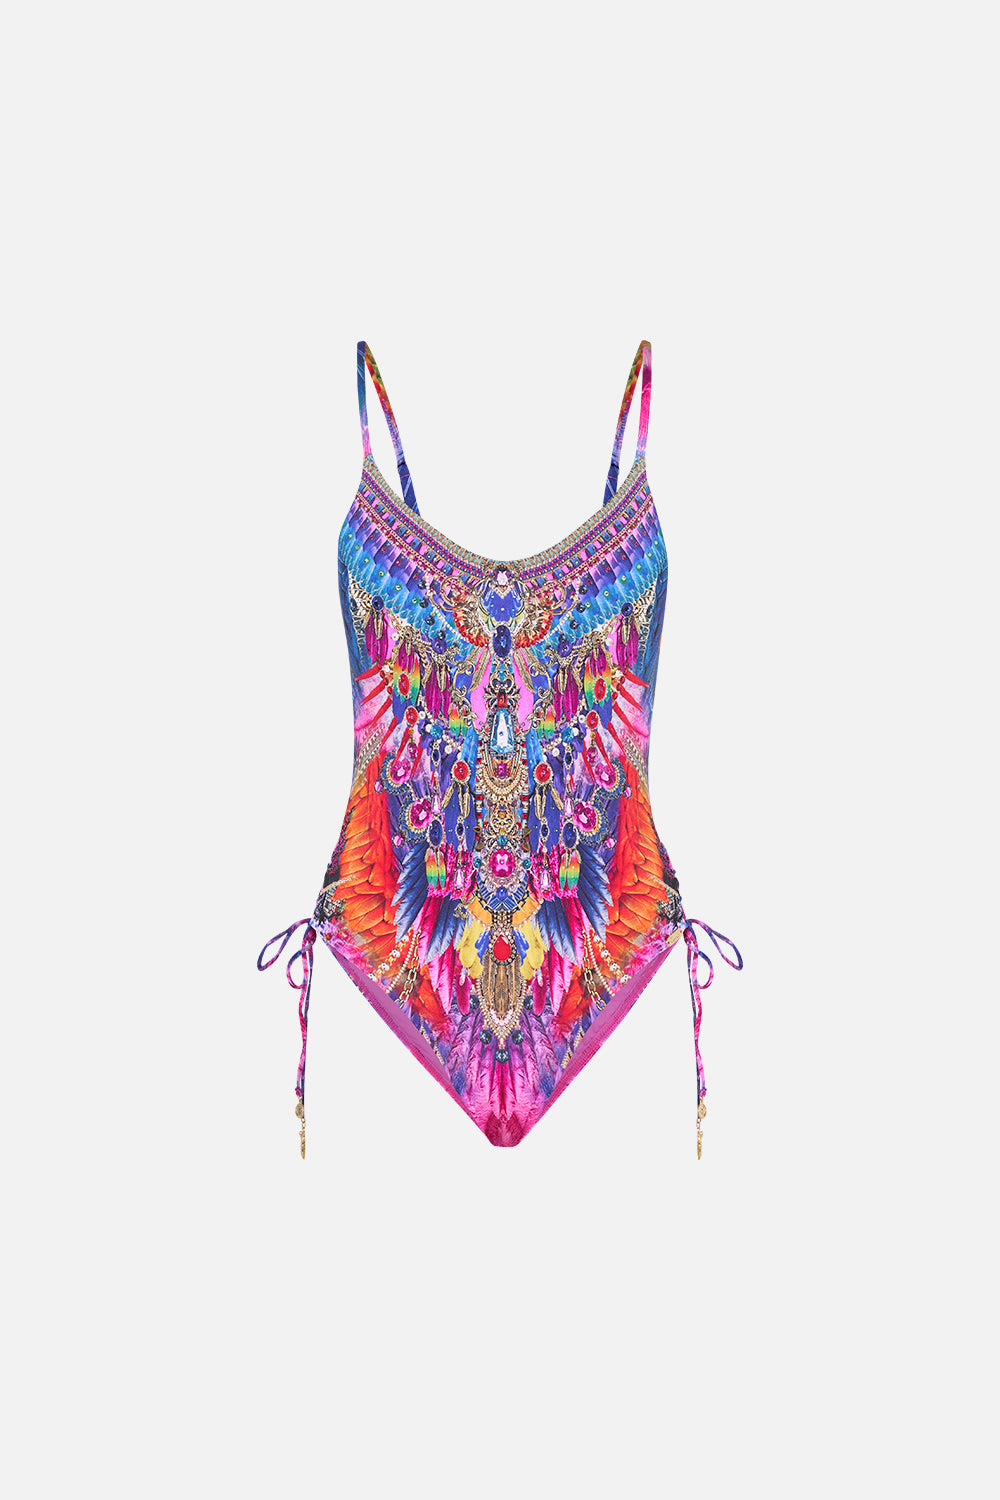 SCOOP NECK LACE UP SIDE ONE PIECE DANCING WITH DESTINY